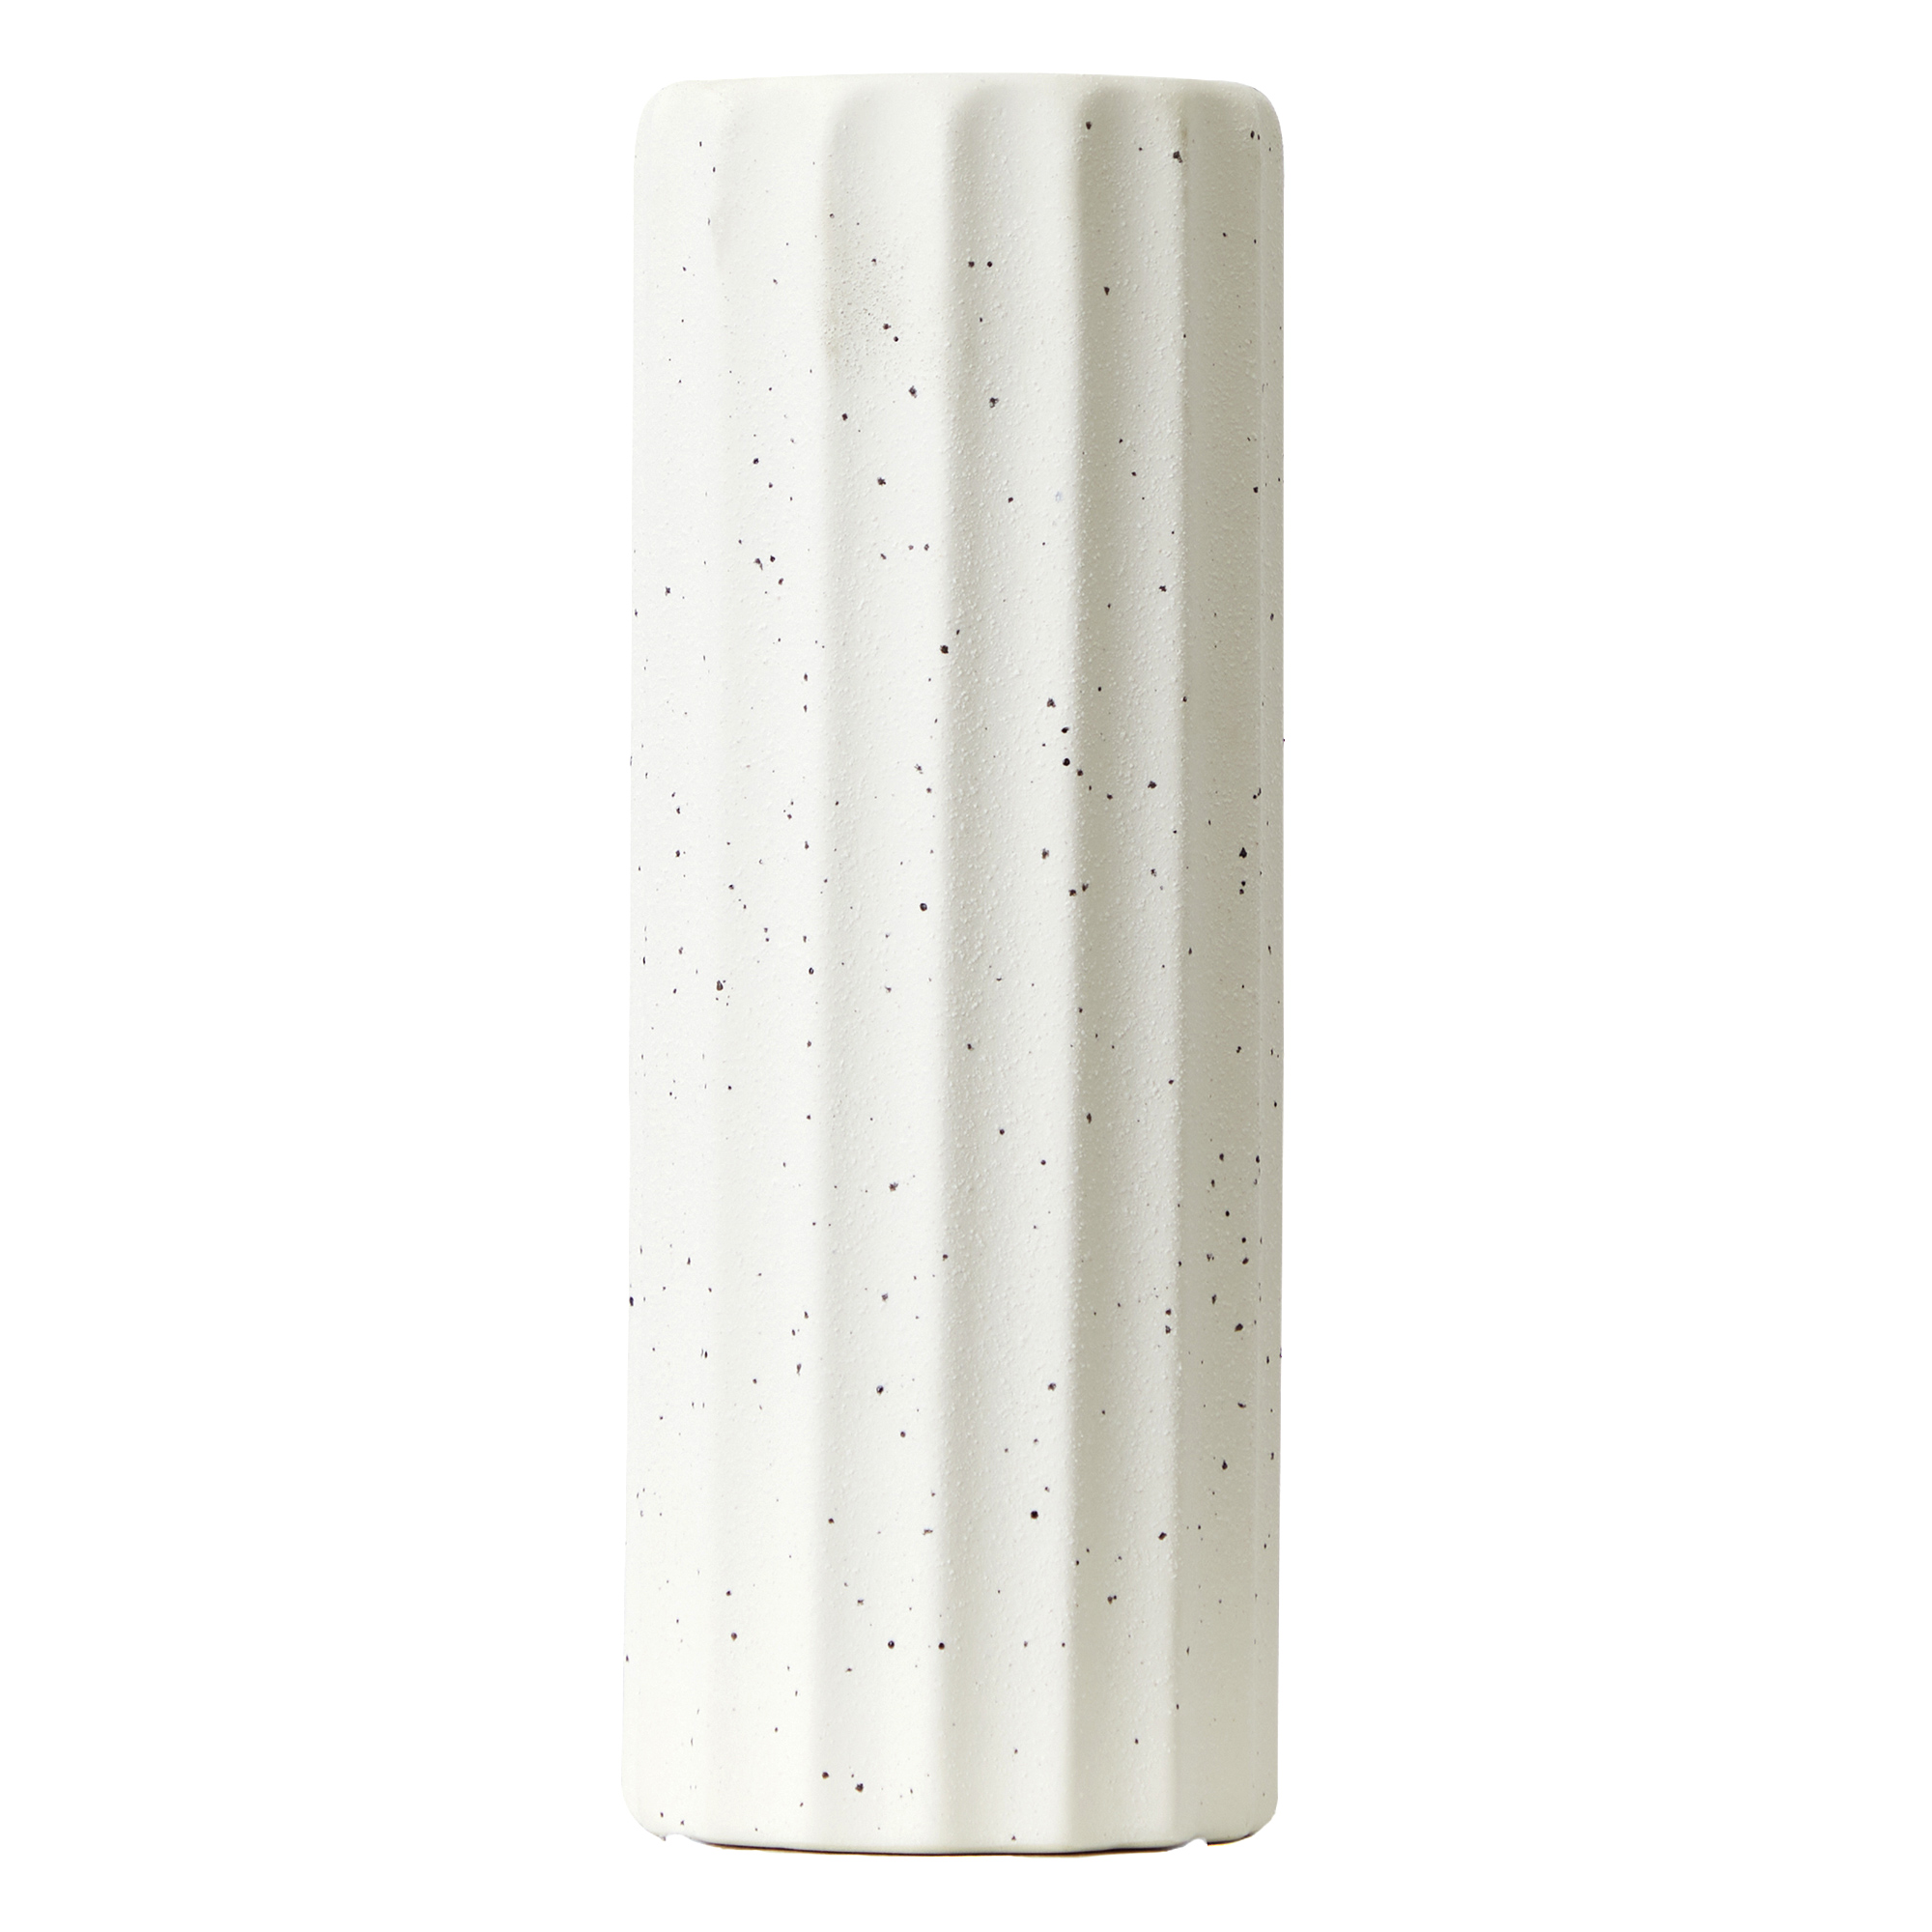 Mainstays 12" White Speckled Wavy Textured Stone Vase - image 1 of 5